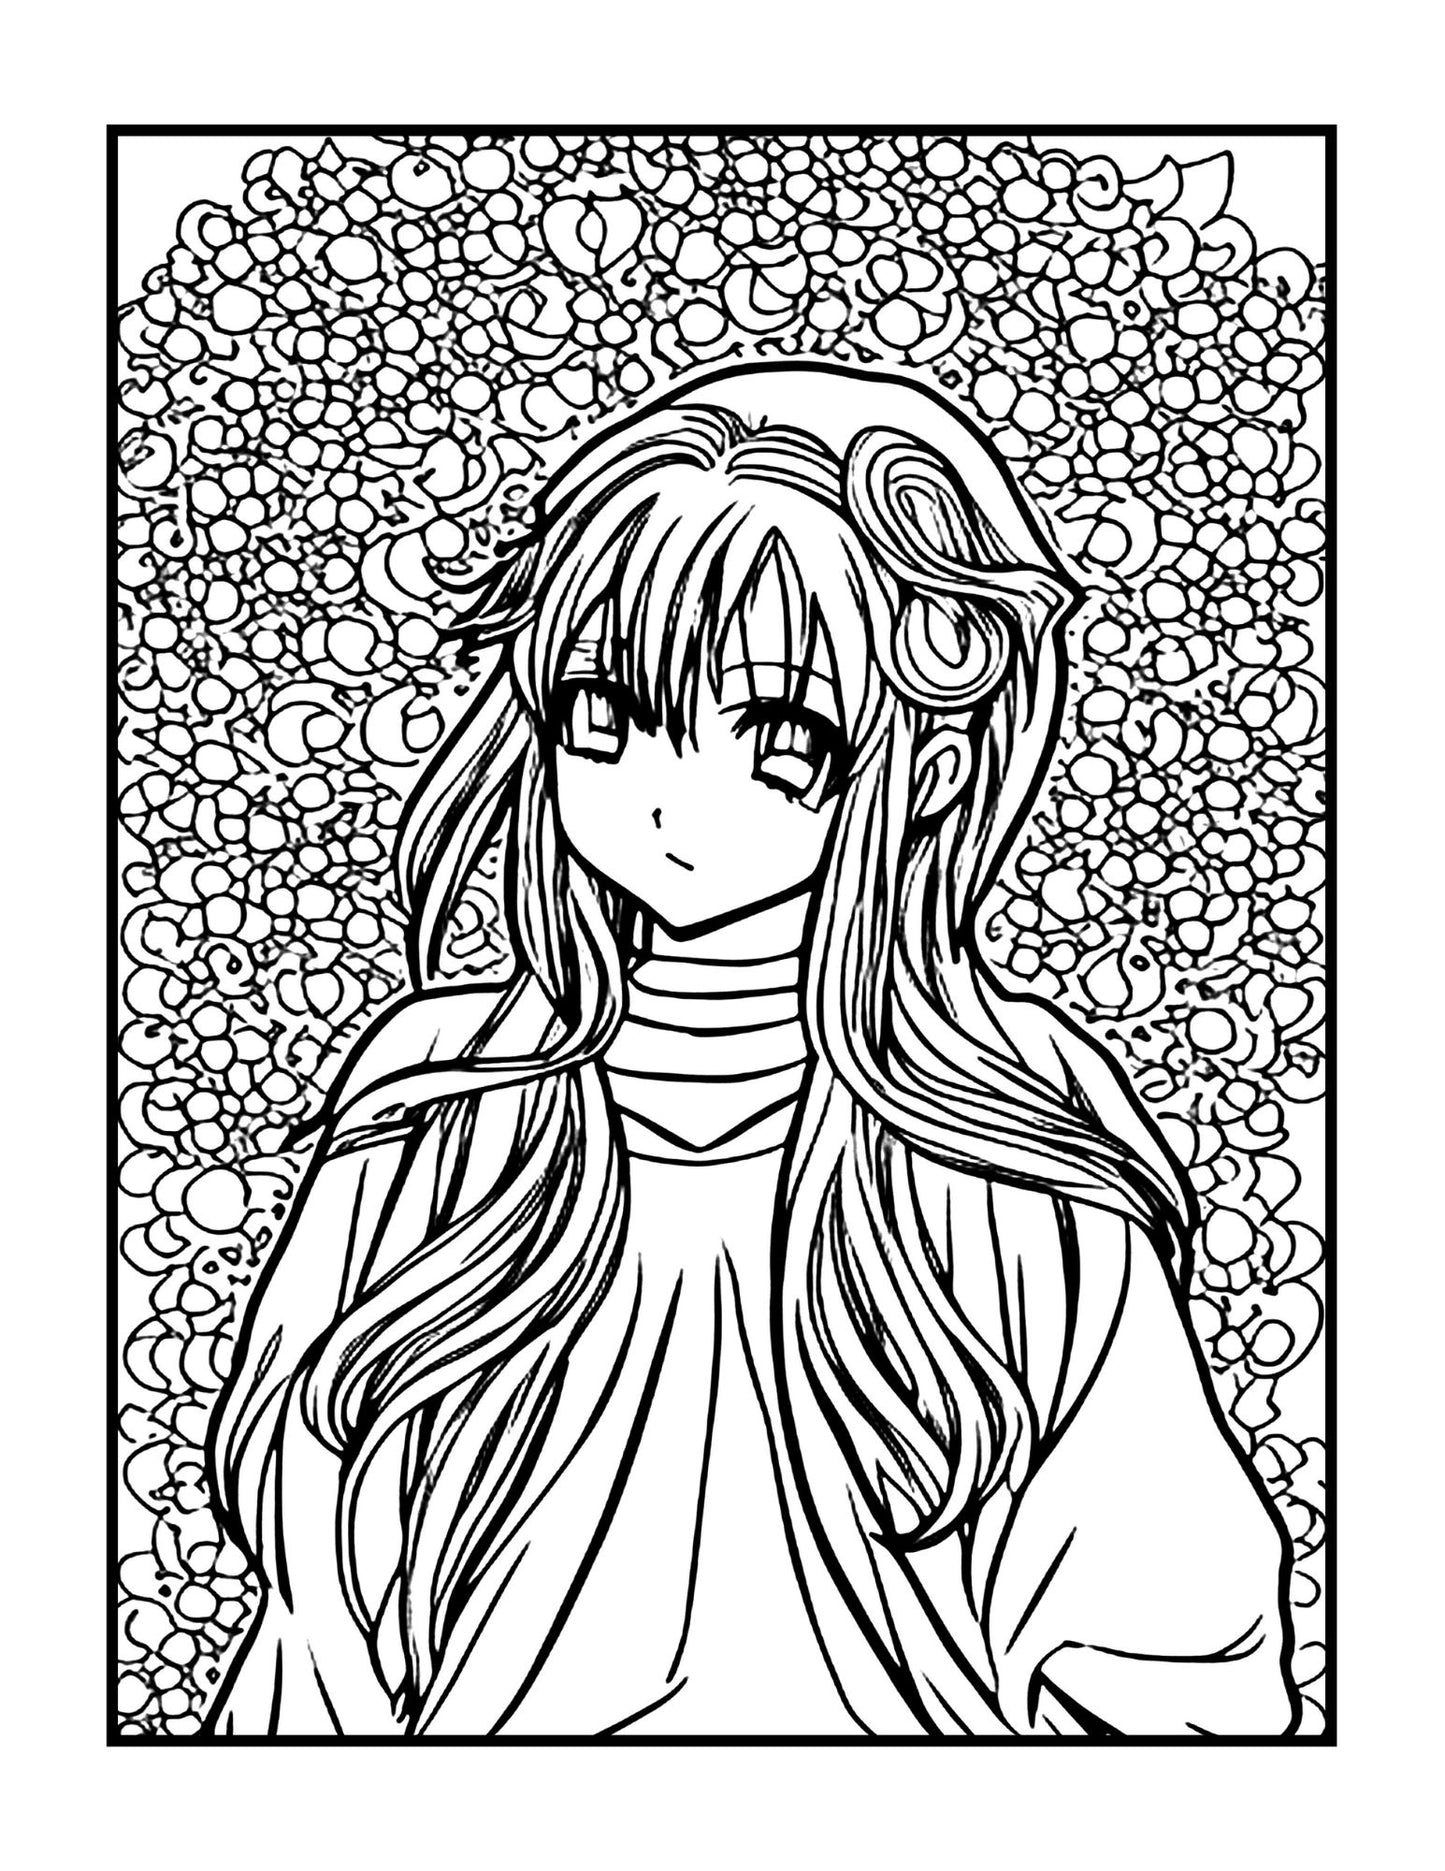 Anime Coloring Pages Gift For Anime Lover Coloring Pages For Kids Girls Boys Adults Anime Lovers Manga Coloring Birthday Gift Coloring Book